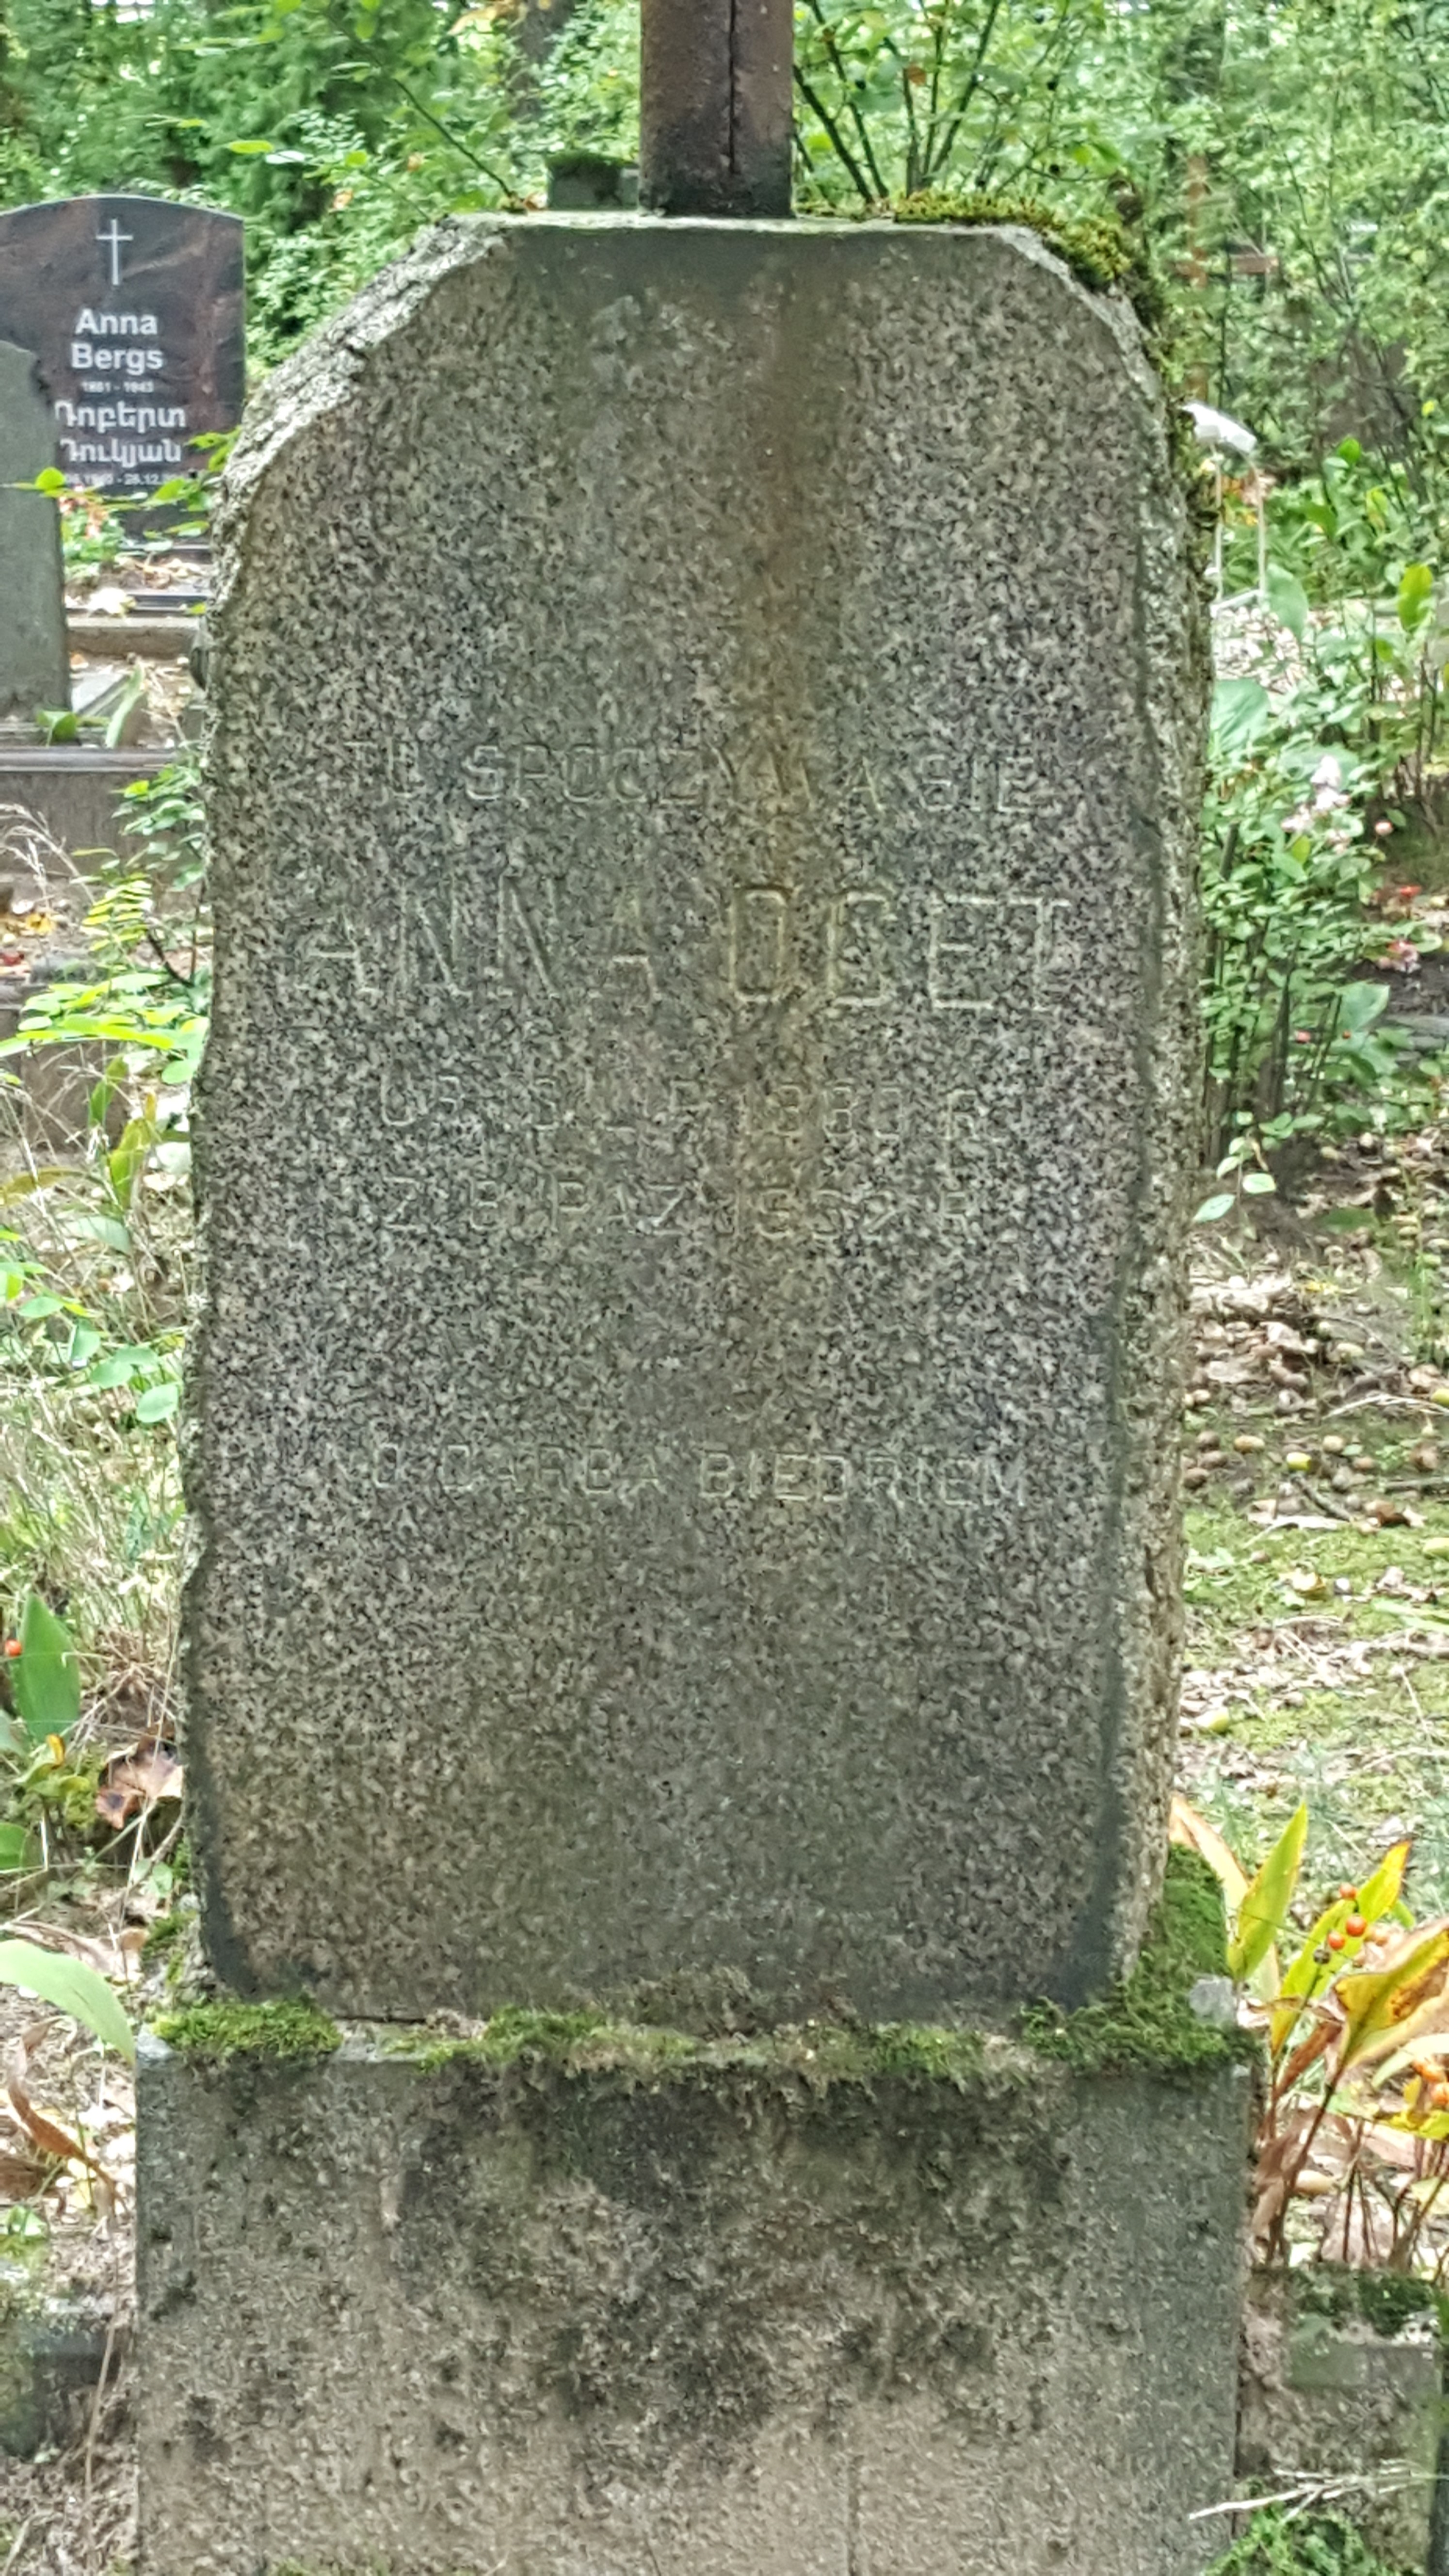 Inscription from the gravestone of Anna Ocet, St Michael's cemetery in Riga, as of 2021.